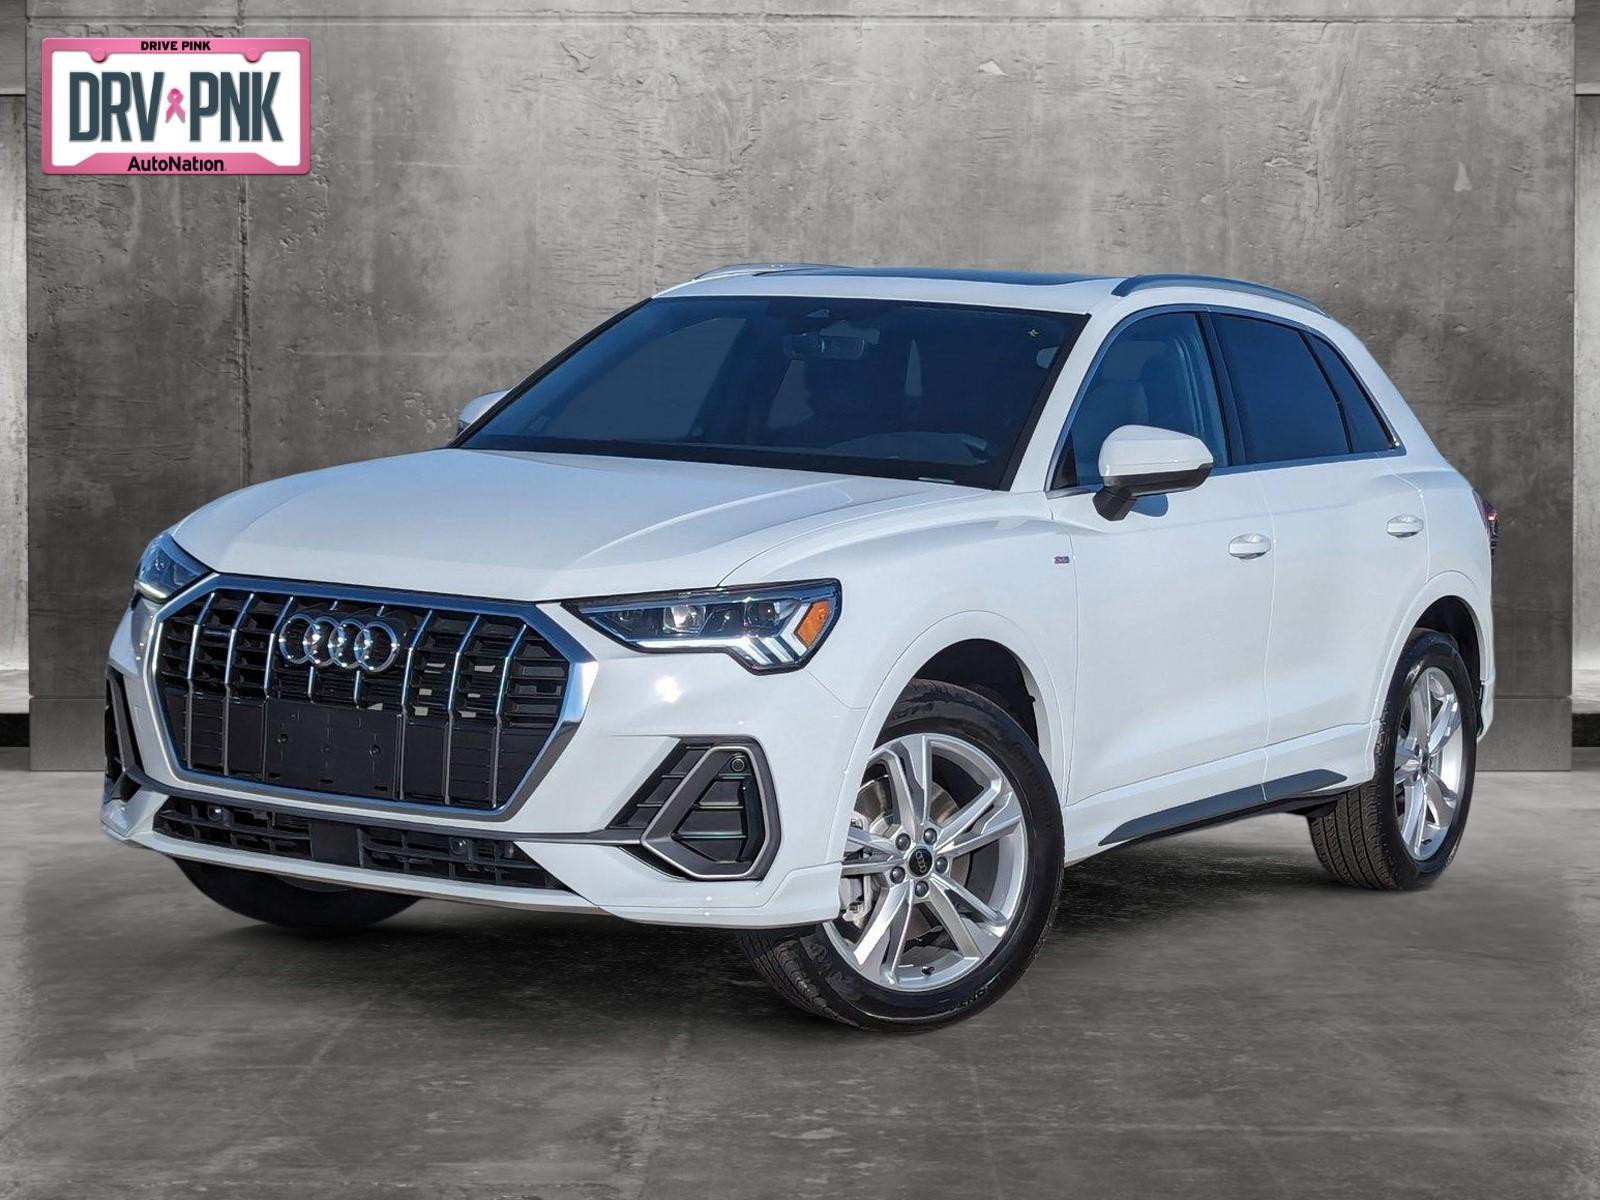 New & Used Audi Q3 for Sale Near Westmont, IL